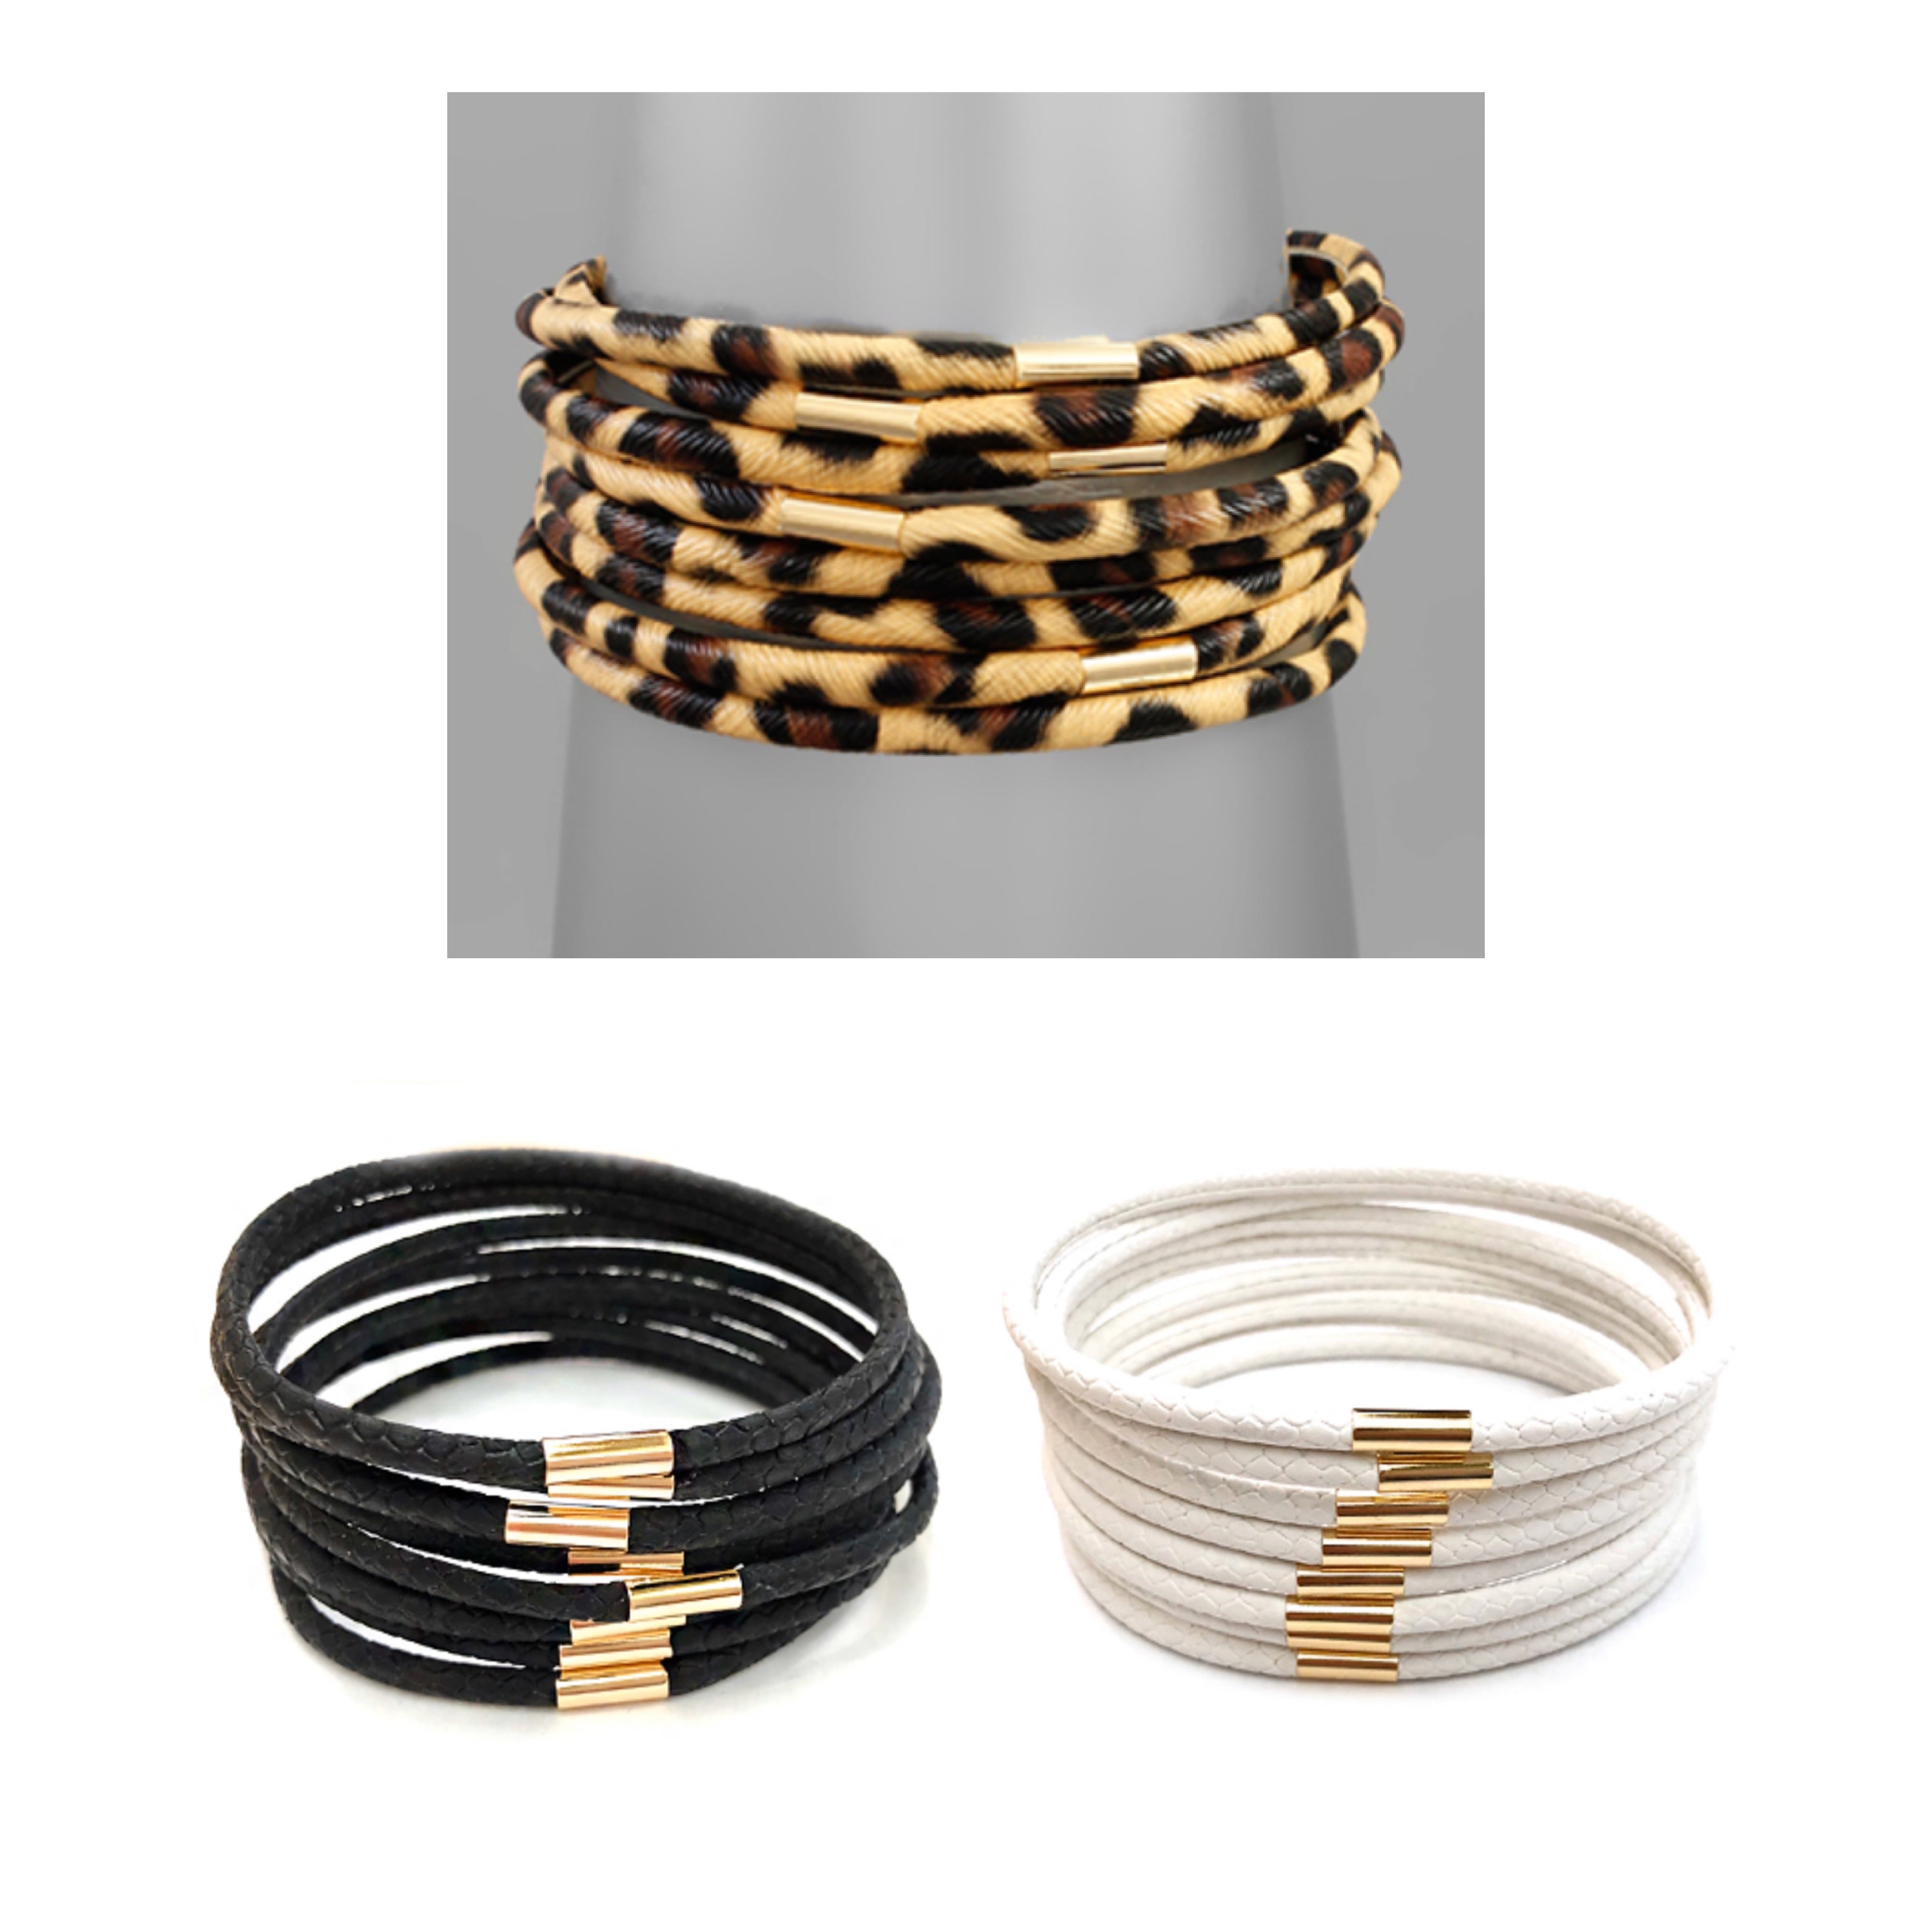 Thin leather wrapped bangles